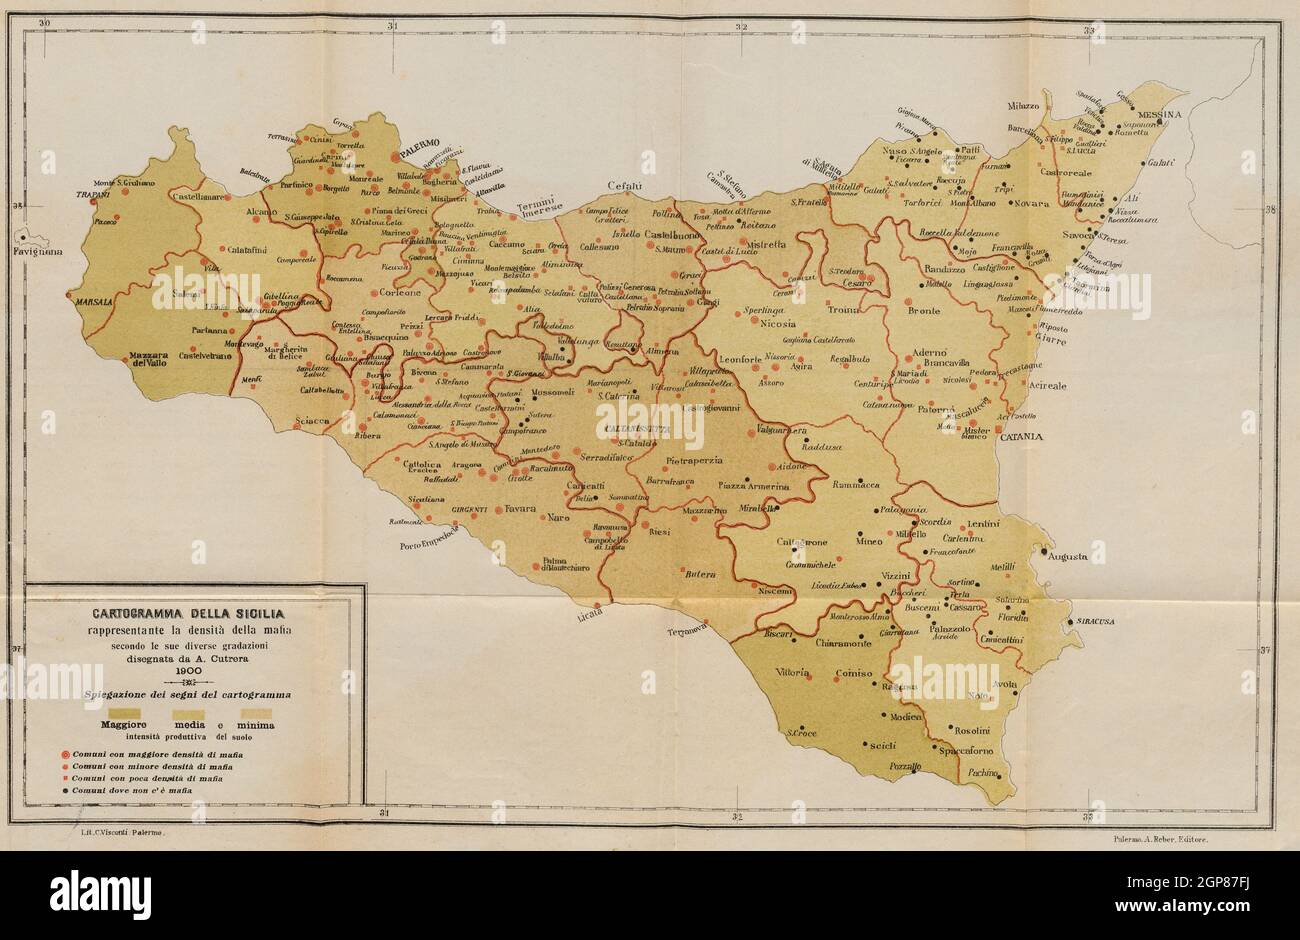 1900 map of Mafia presence in Sicily. Towns with Mafia activity are marked as red dots. The Mafia operated mostly in the west, in areas of rich agricultural productivity. Stock Photo